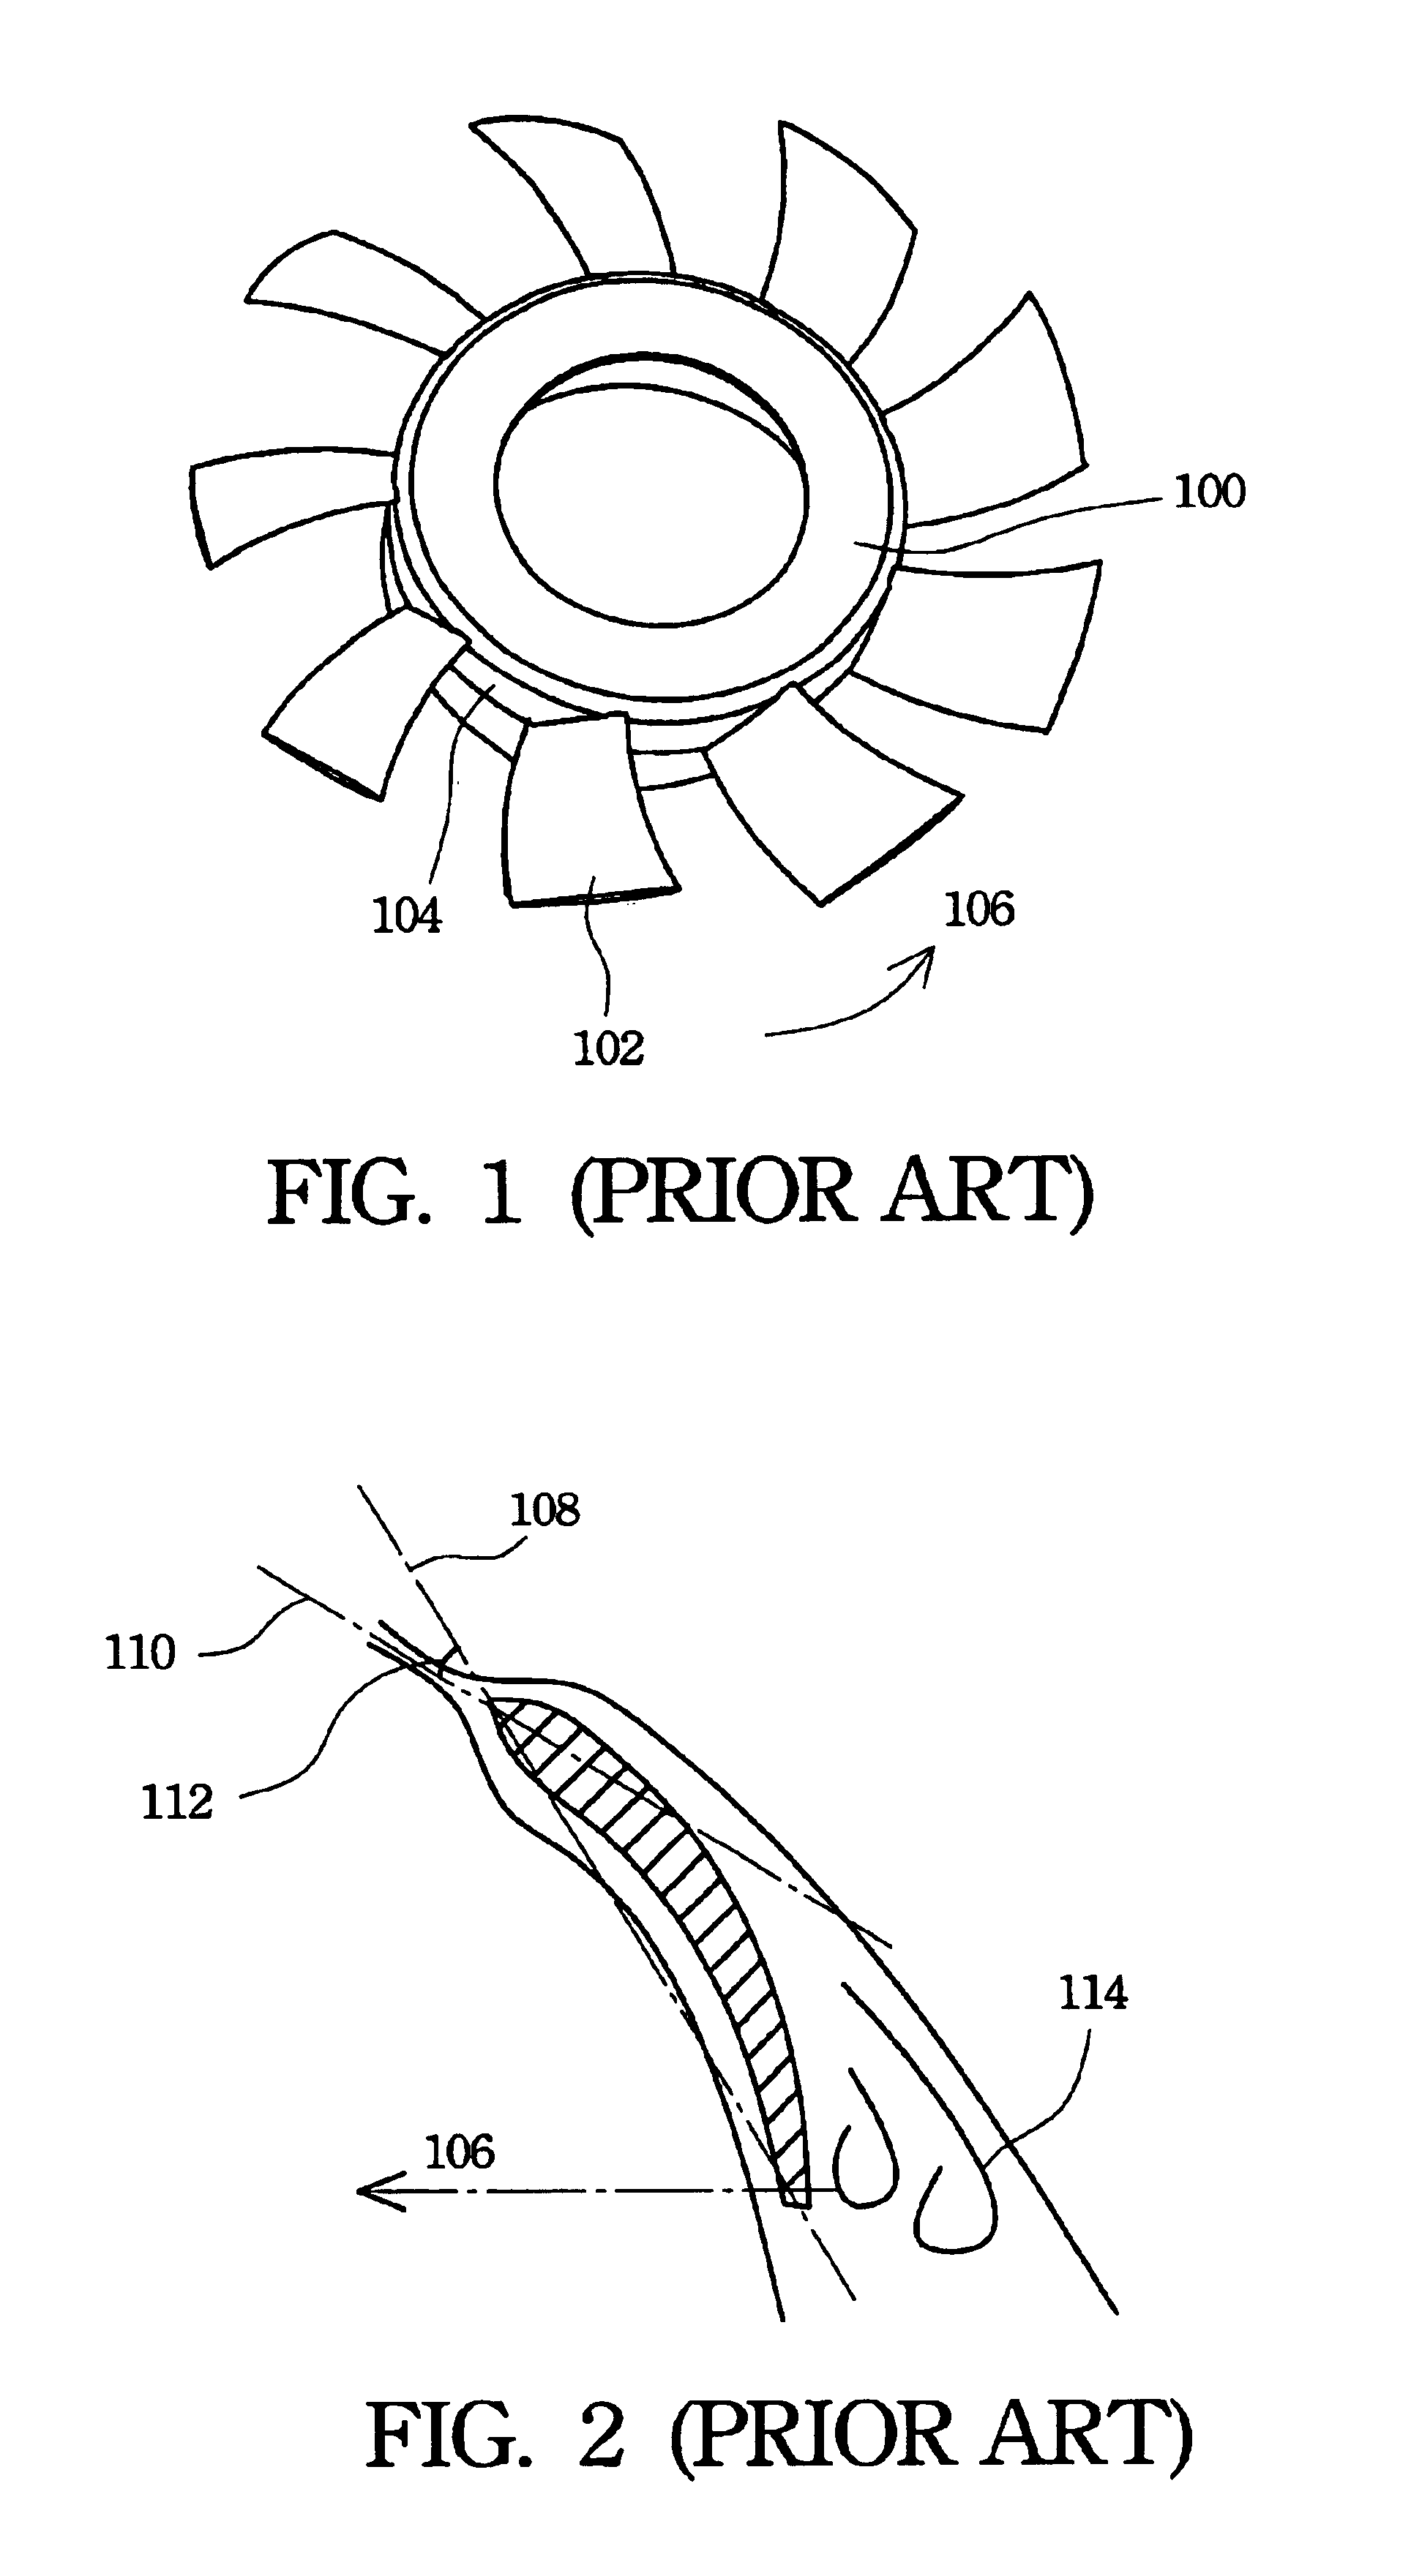 Axial flow fan with multiple segment blades